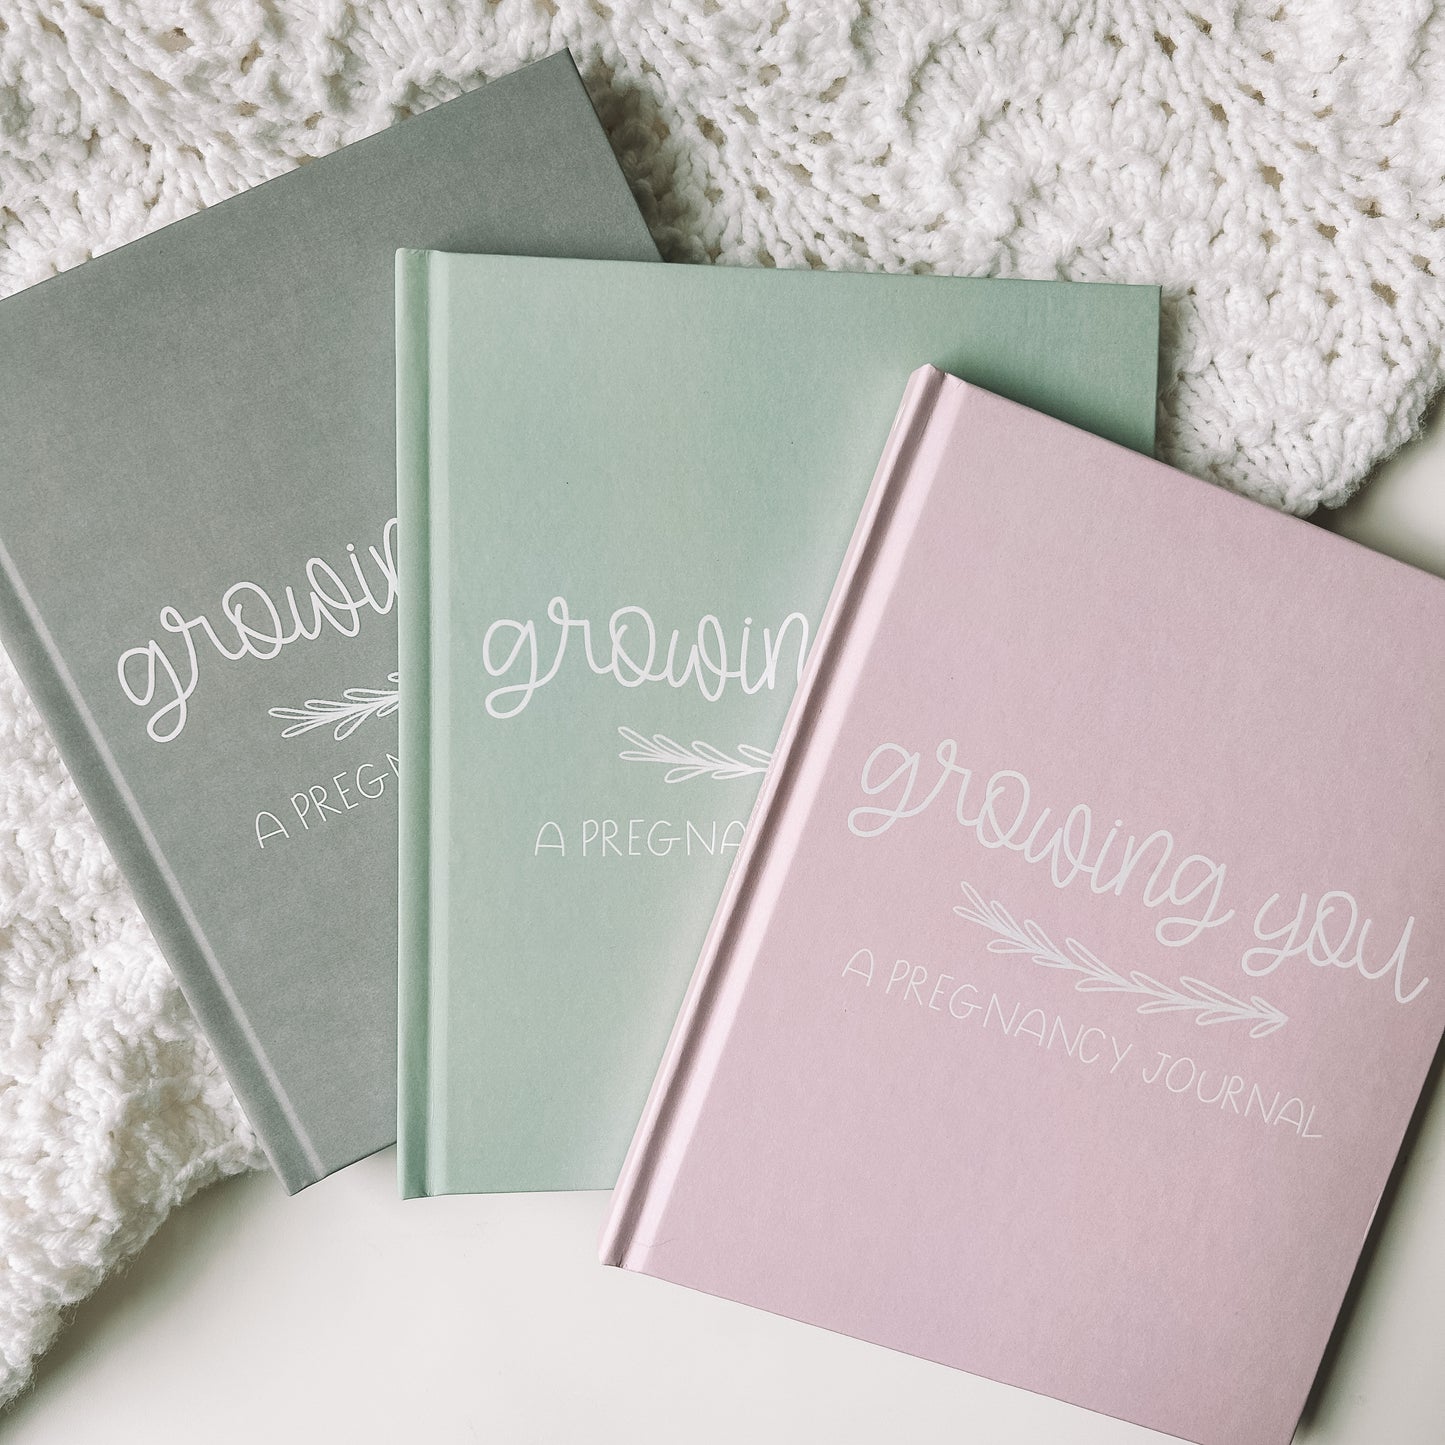 Grey, green, and pink hardcover memory books titled Growing You A Pregnancy Journal in white text.